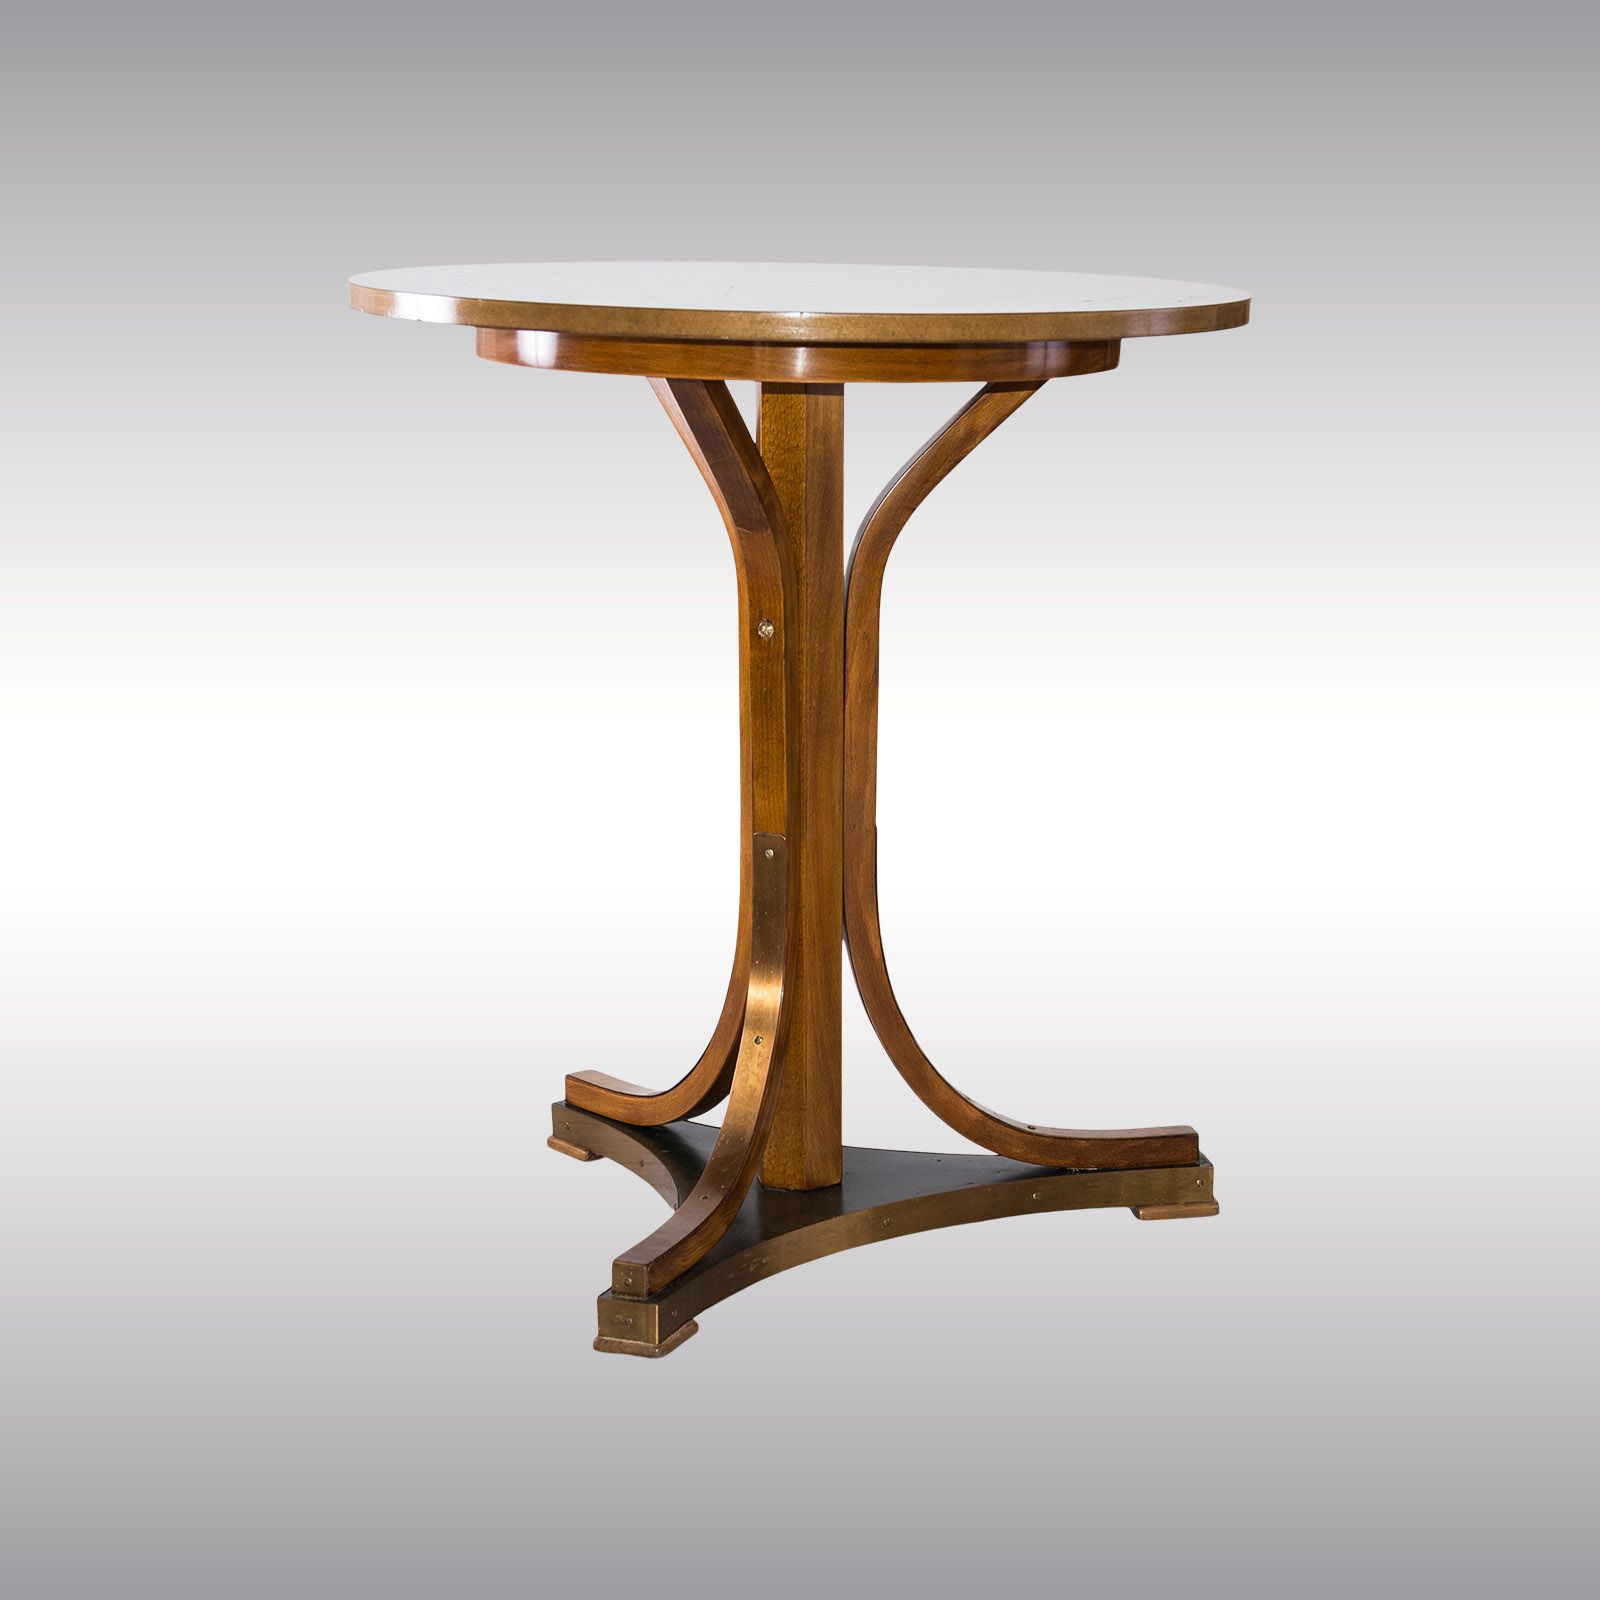 WOKA LAMPS VIENNA - OrderNr.: 70080|Otto Wagner attr. Table Thonet #8050 before 1911 - Design: Otto Wagner